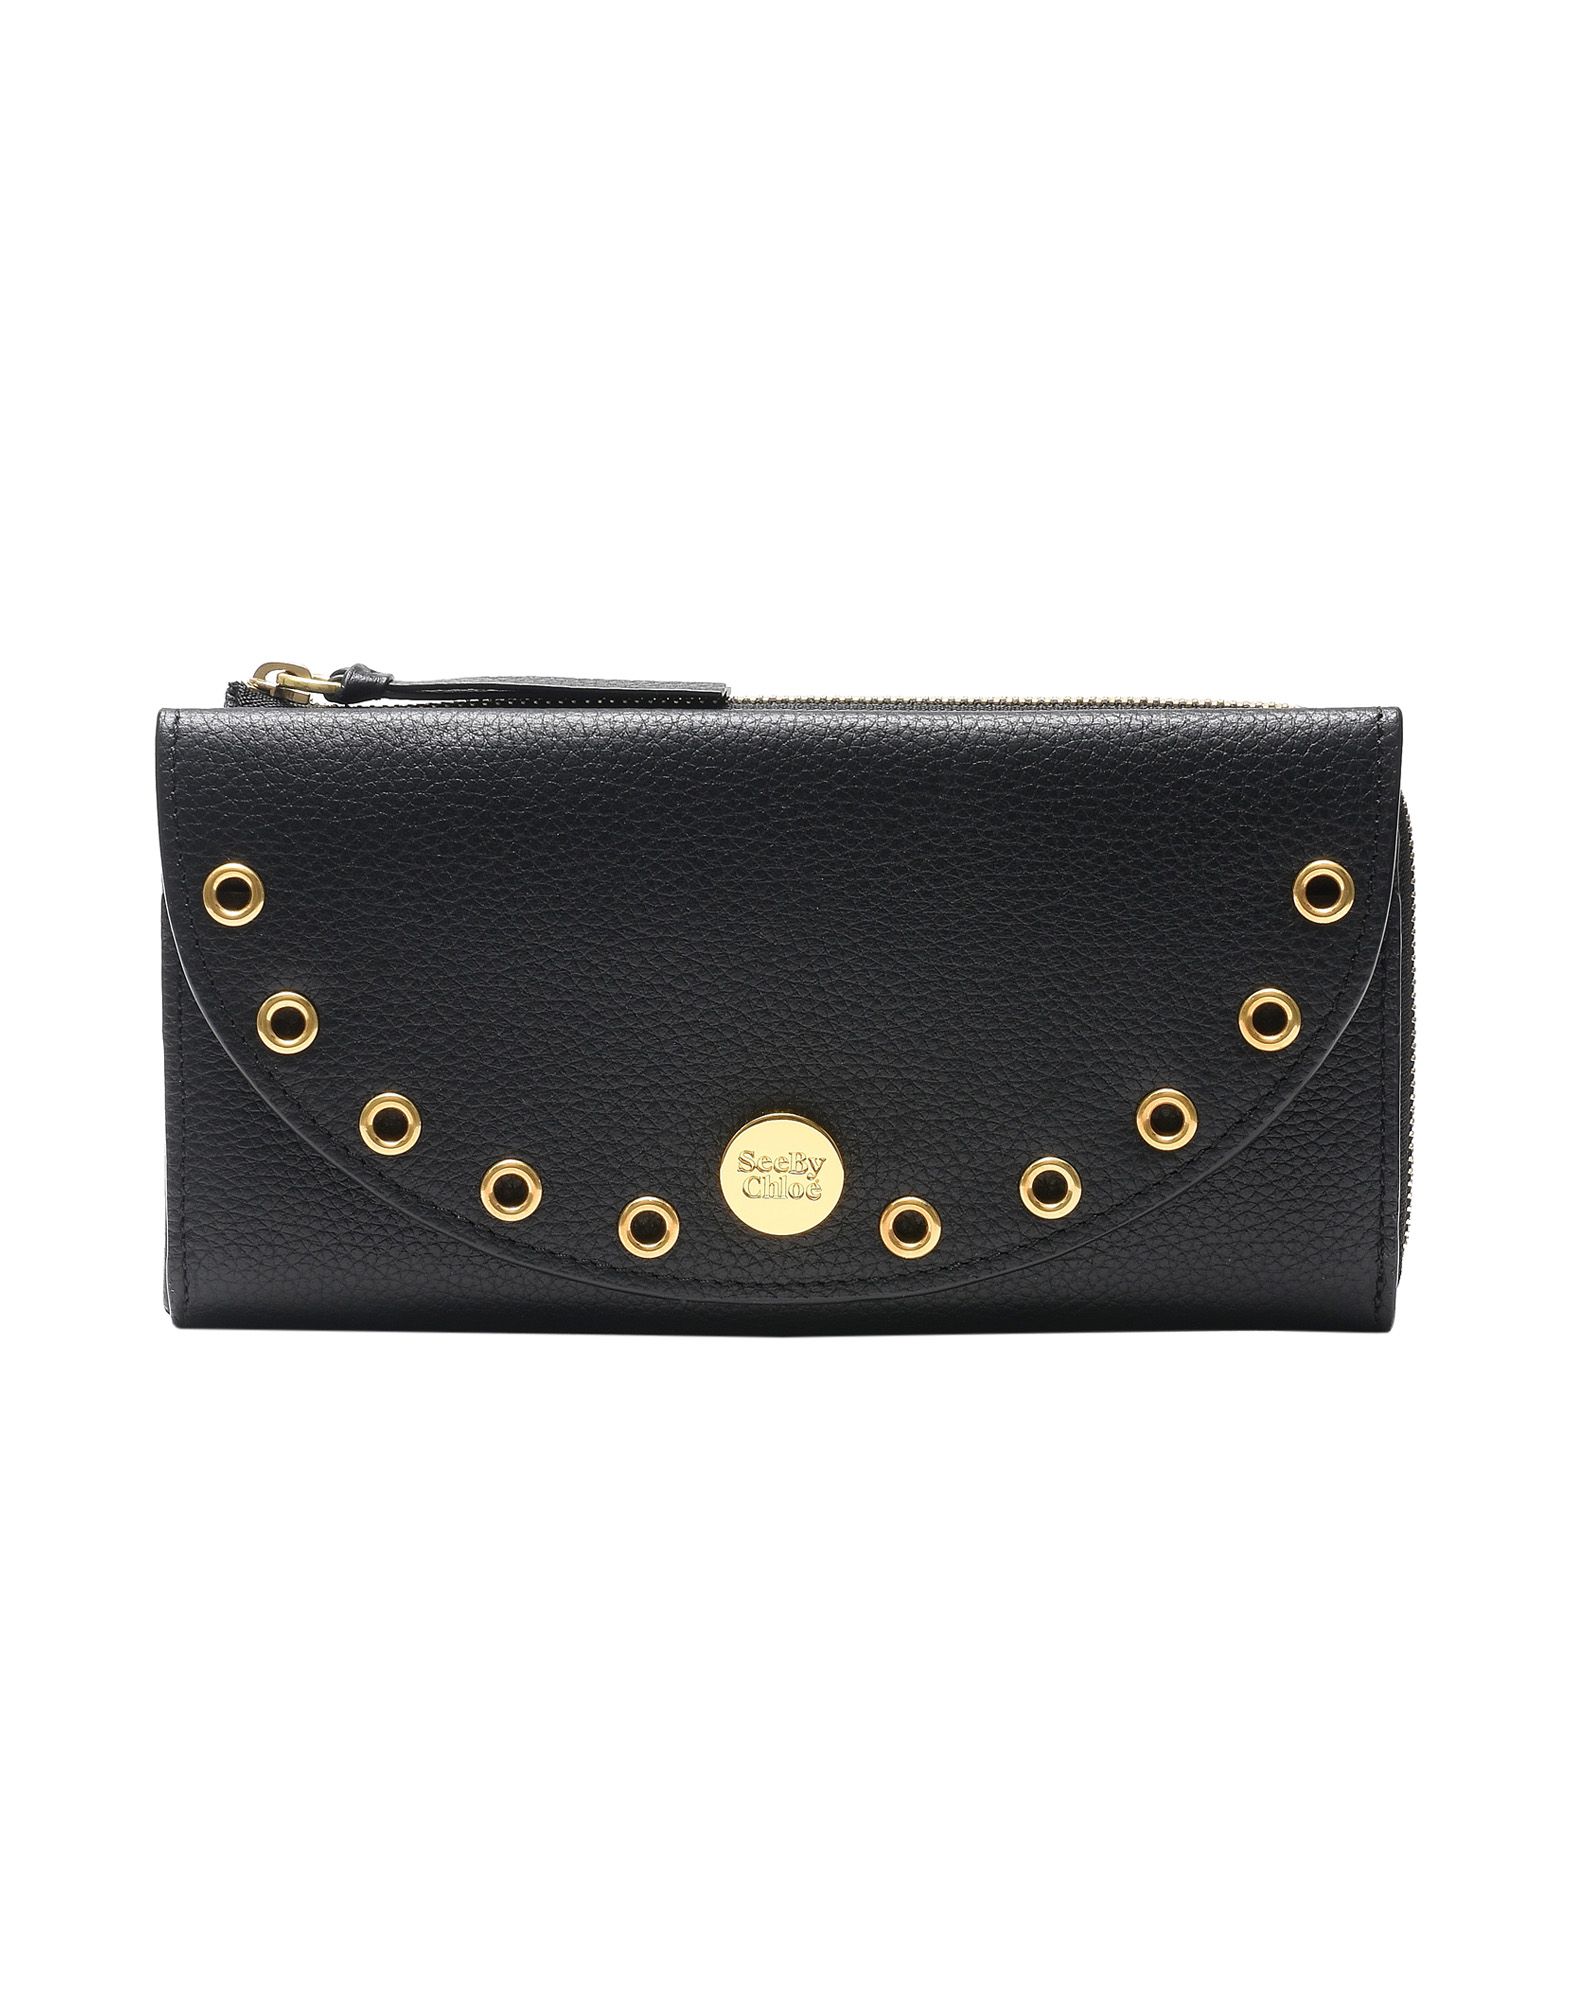 SEE BY CHLOÉ WALLETS,46594120TG 1